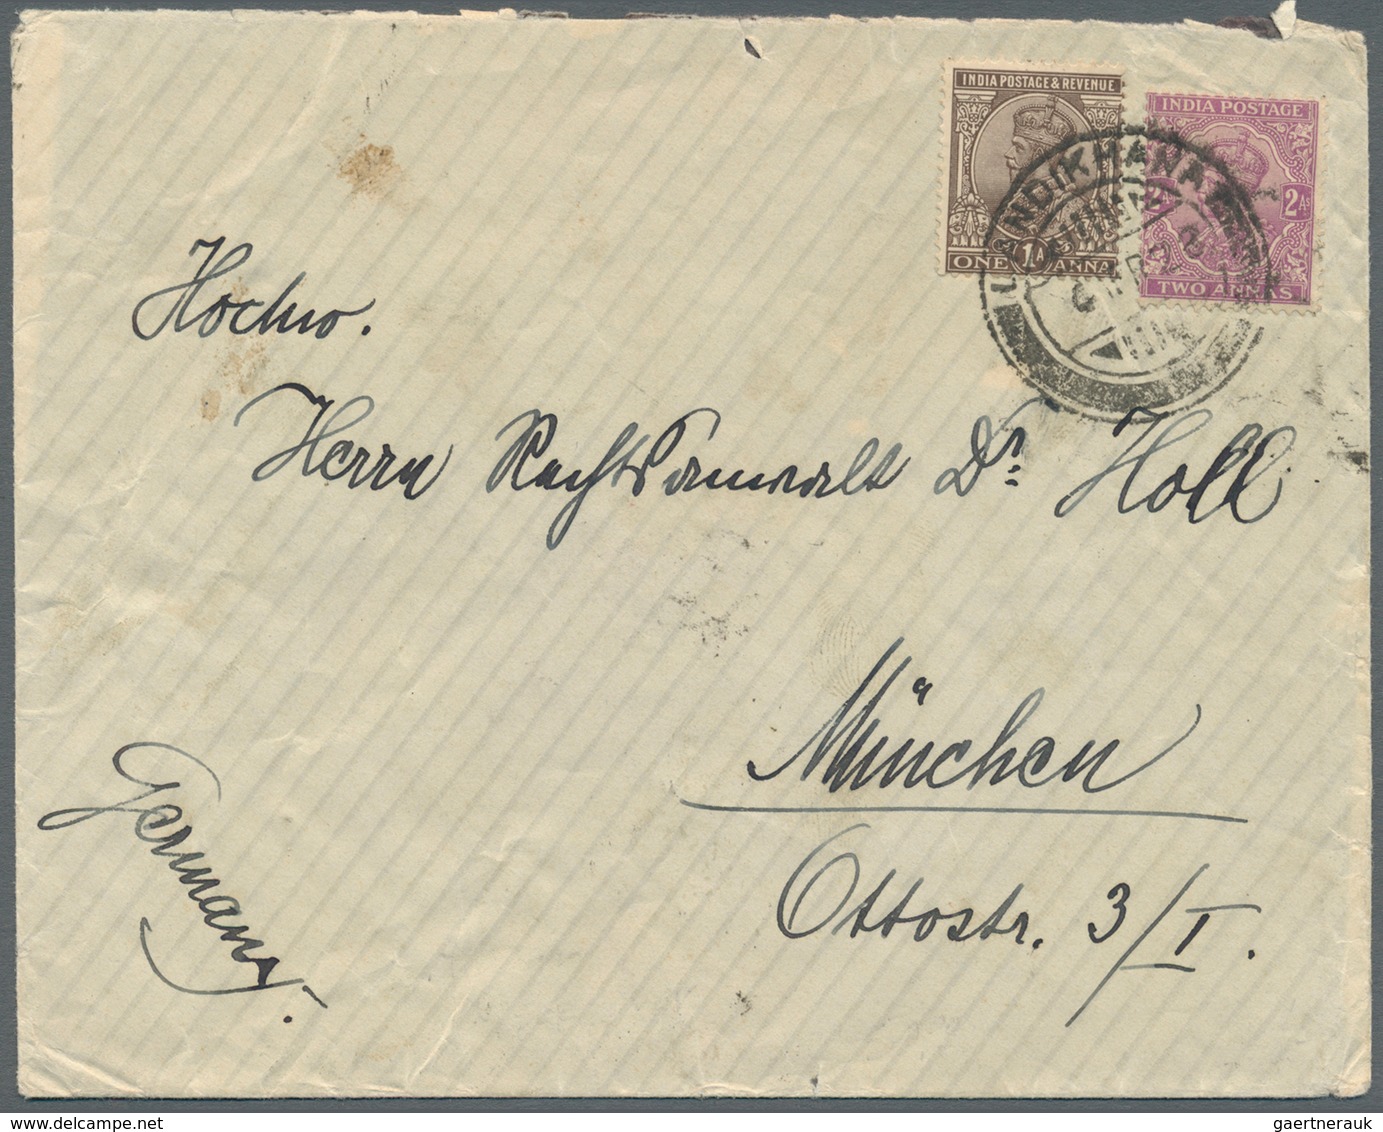 08050 Afghanistan: 1924-30: Three pre-UPU and one UPU period covers to GERMANY, with 1) 1924 cover to Berl